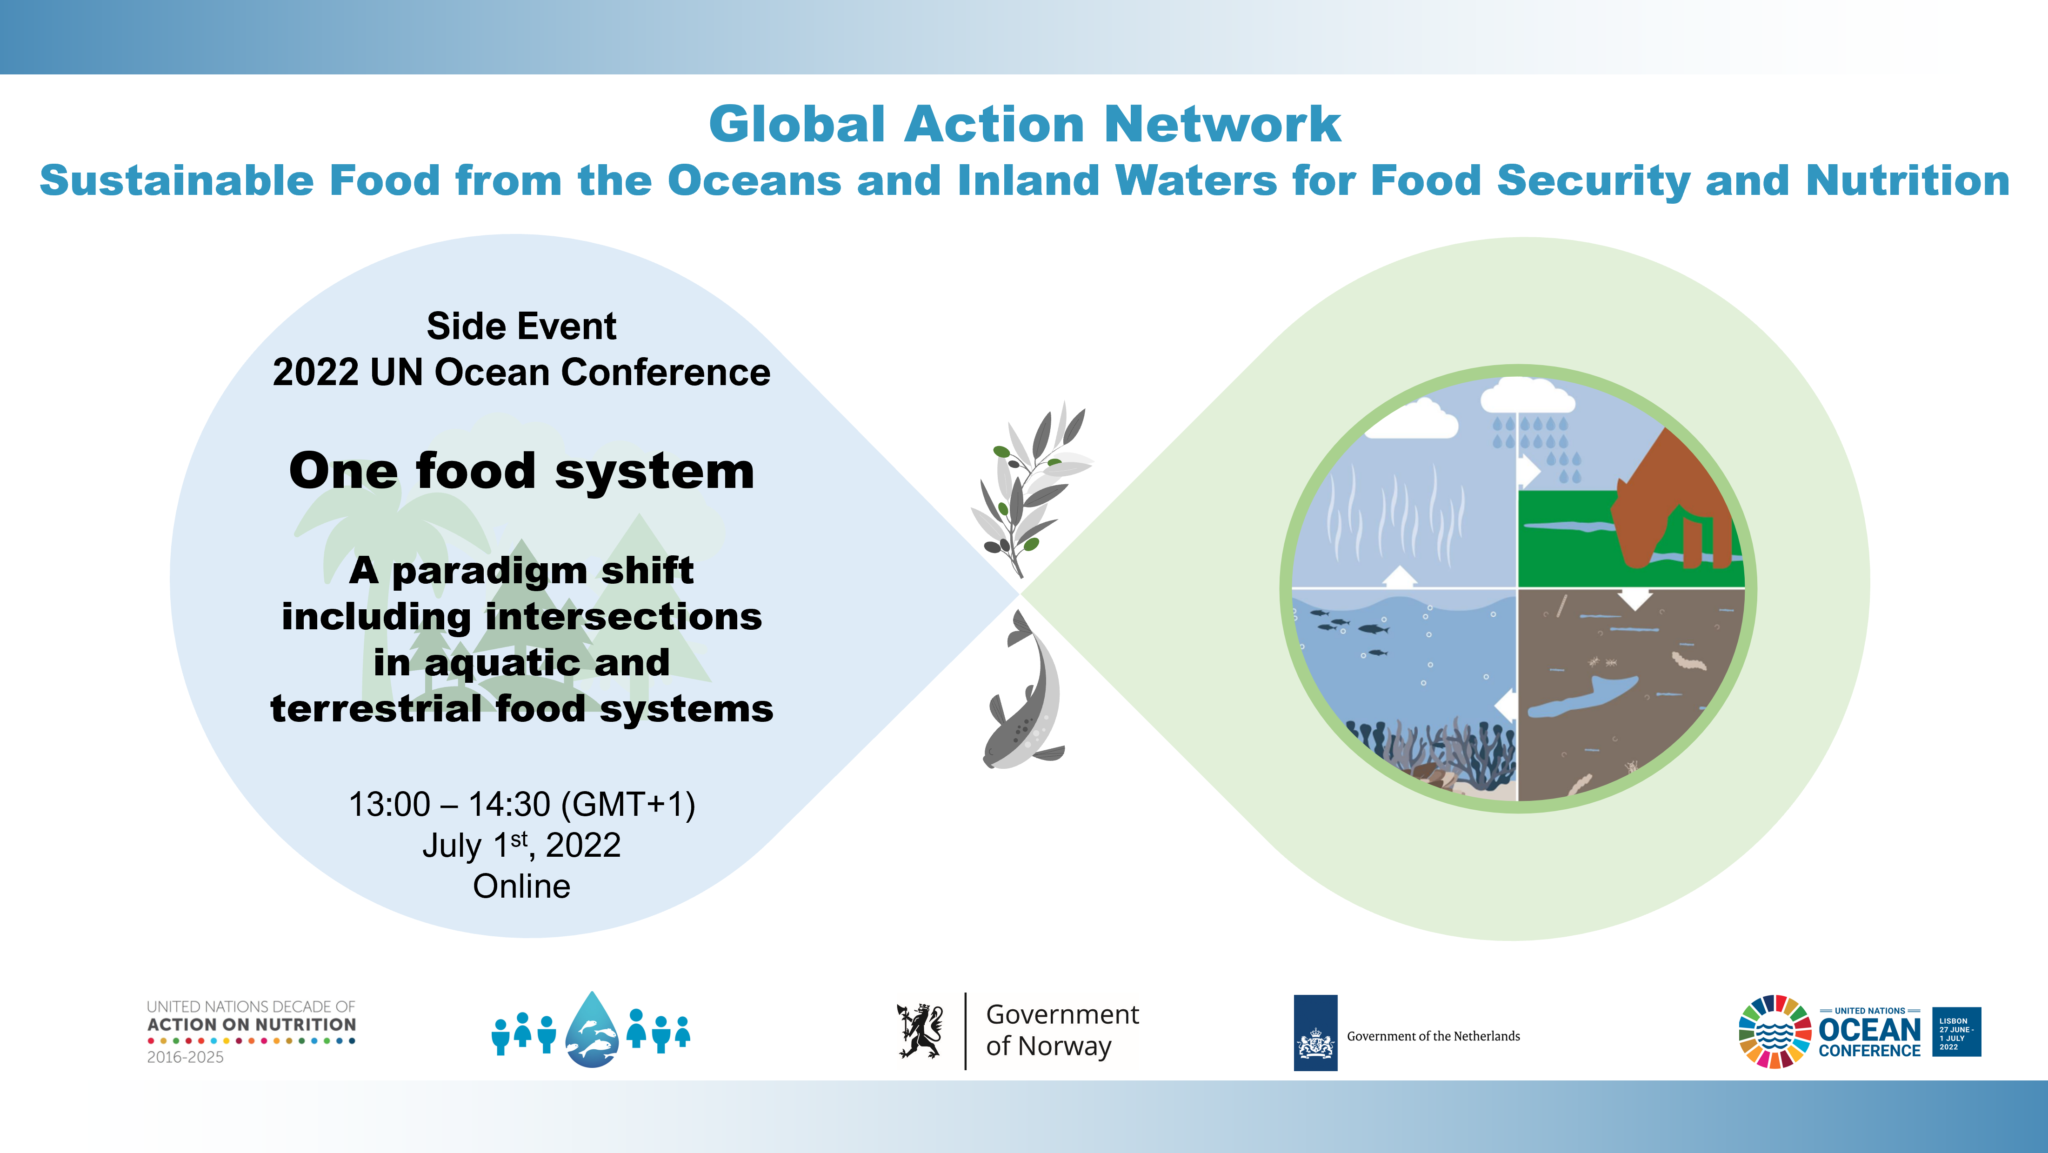 One food system: A paradigm shift including intersections between aquatic and terrestrial food systems